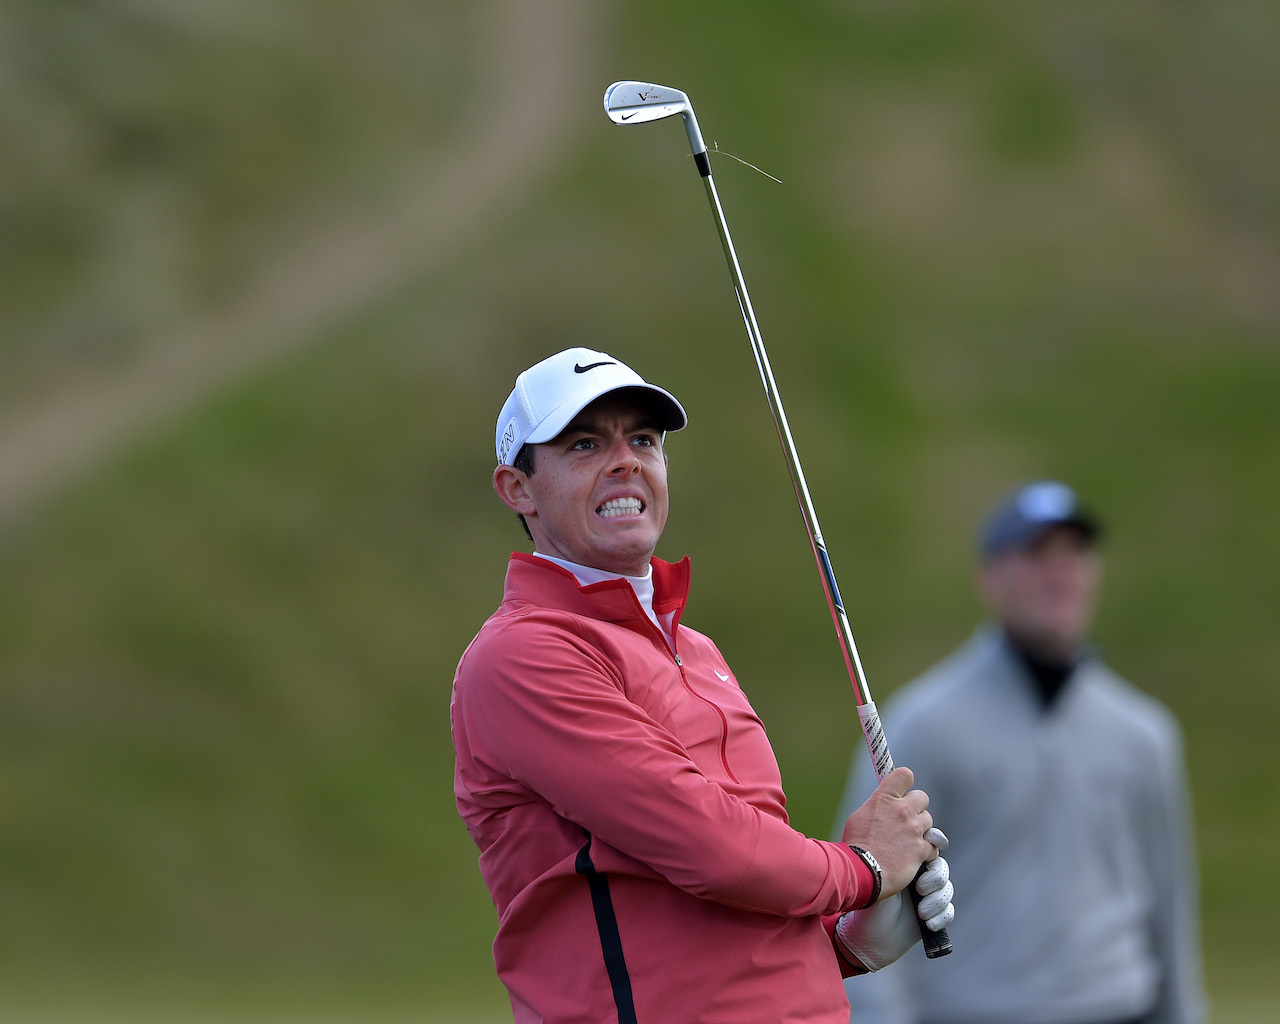 Rory McIlroy grimaces after shot